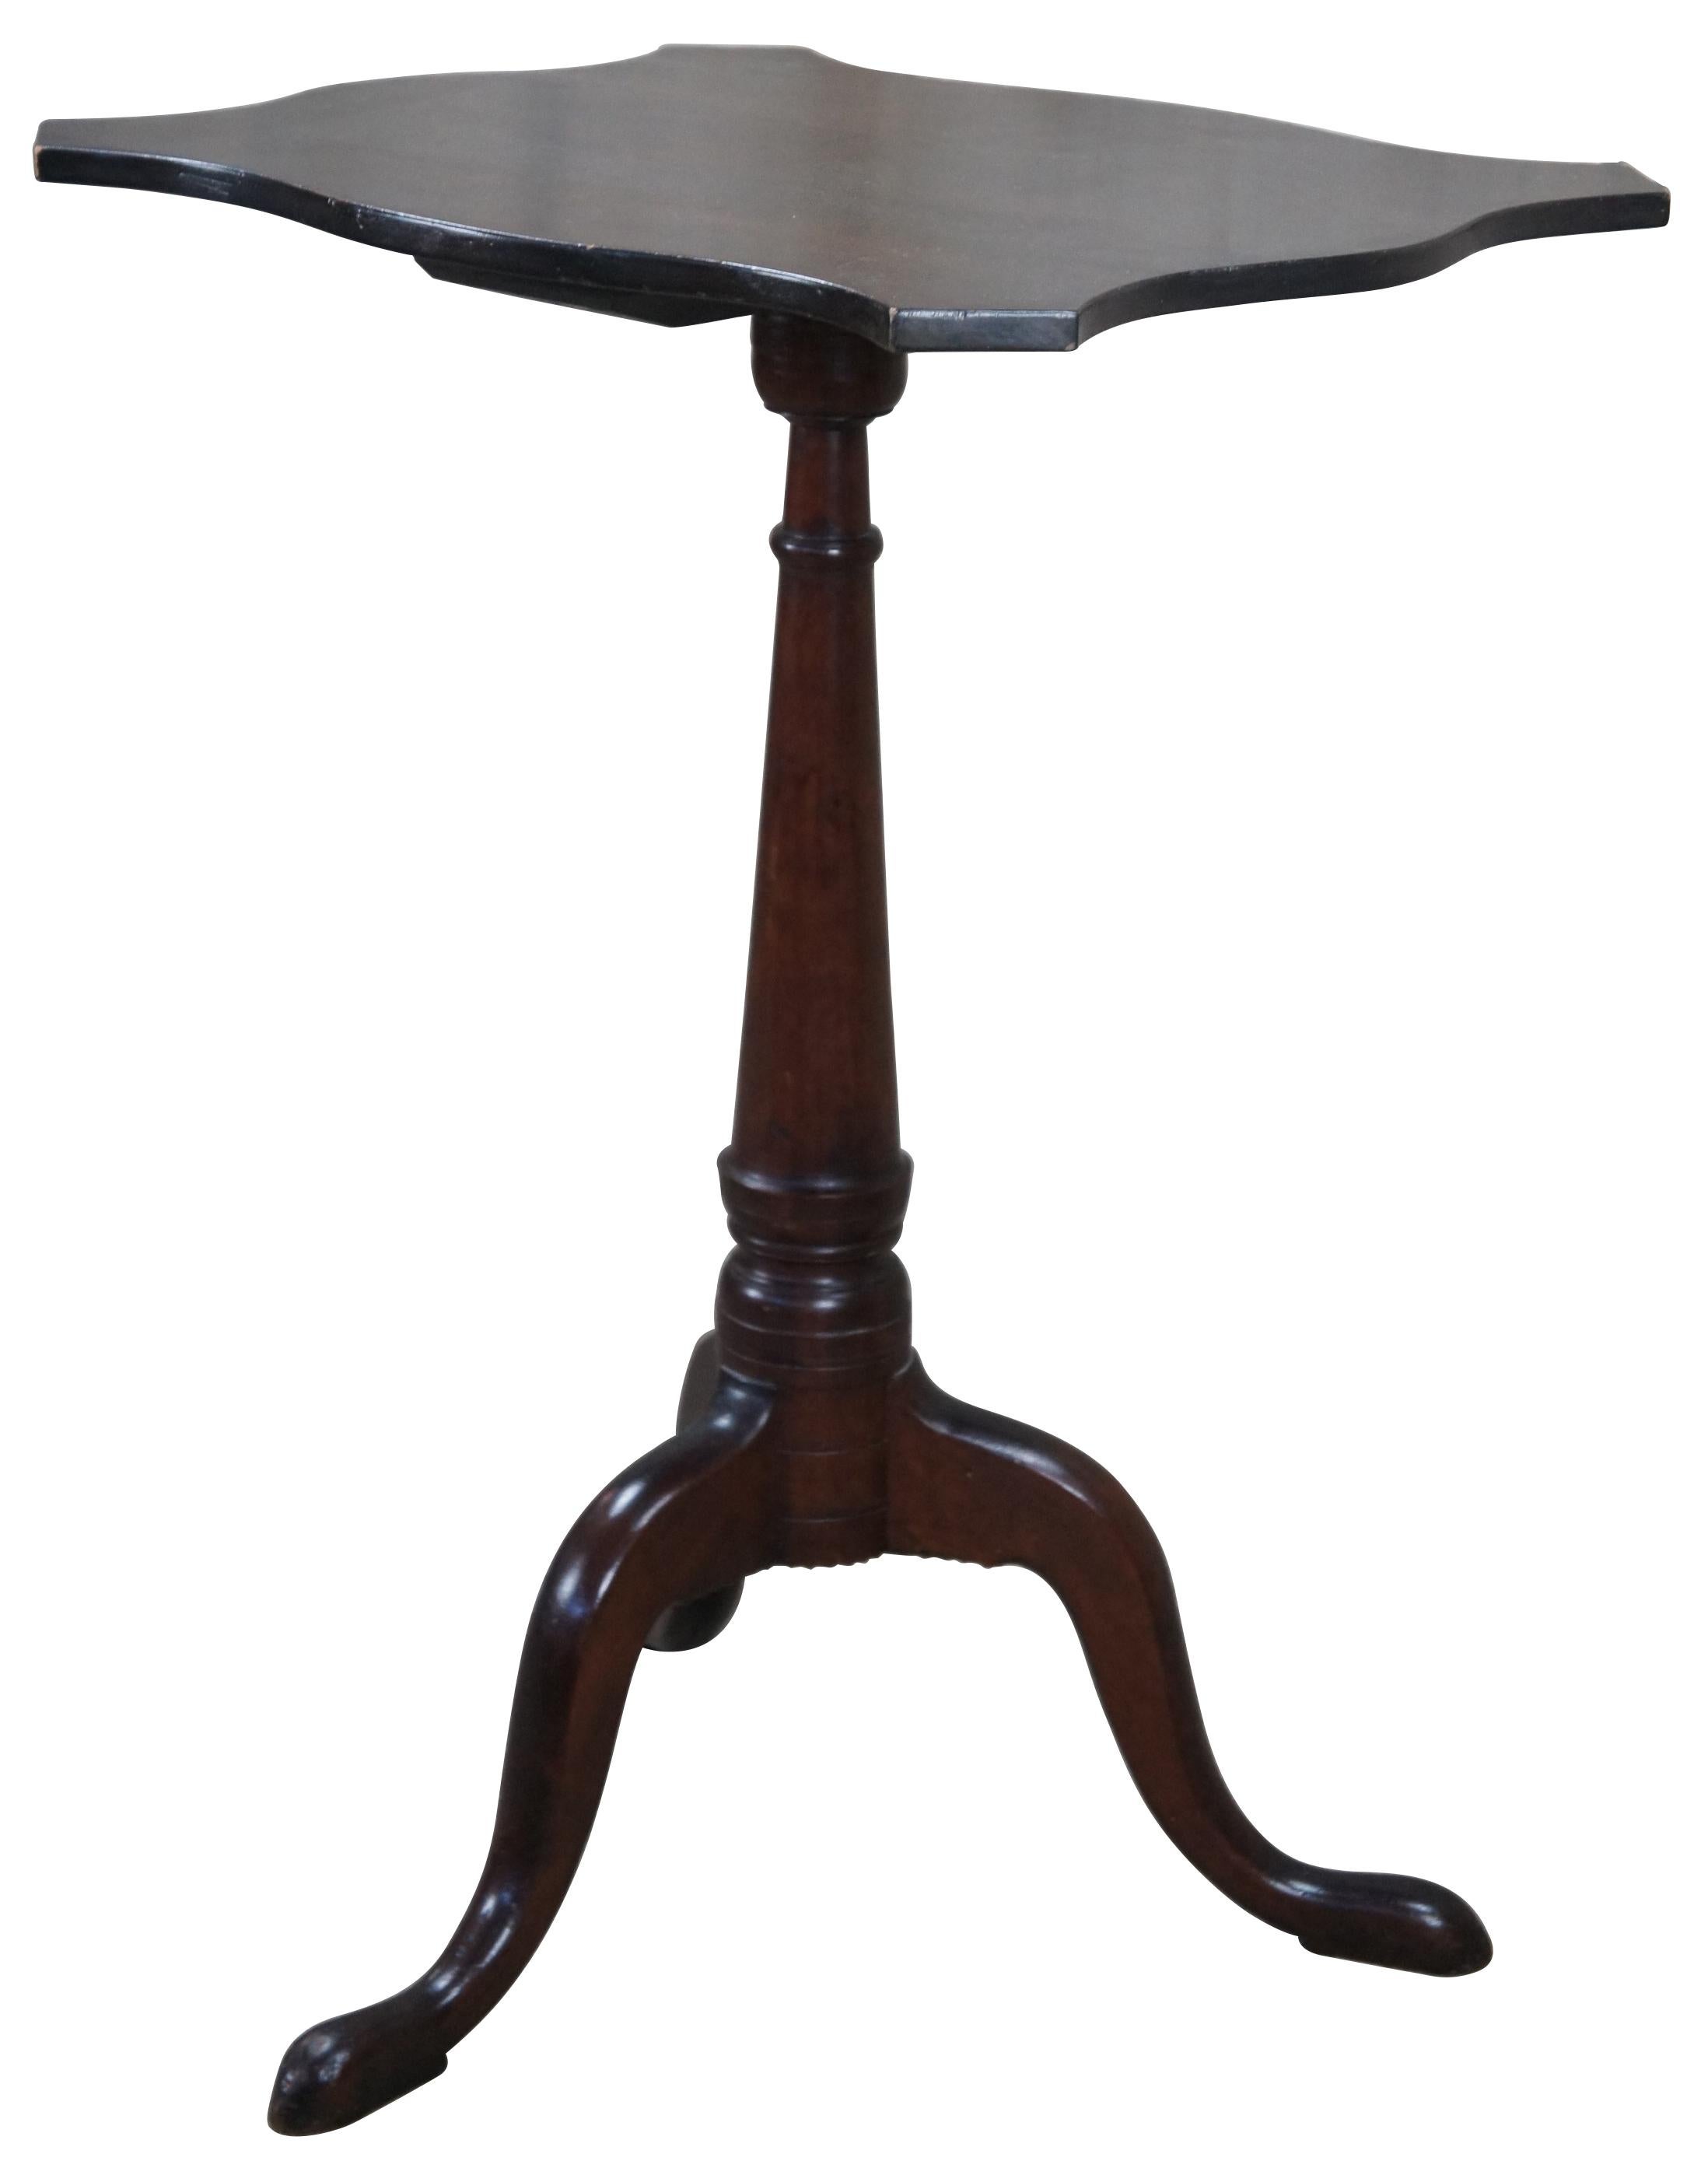 A beautiful 18th century colonial mahogany Newport, Rhode Island candlestand. Features a serpentine turtle top over a conical shaft leading to a tripod base with notched and shaped returns on cabriole legs and slipper feet. The conical shaft relates